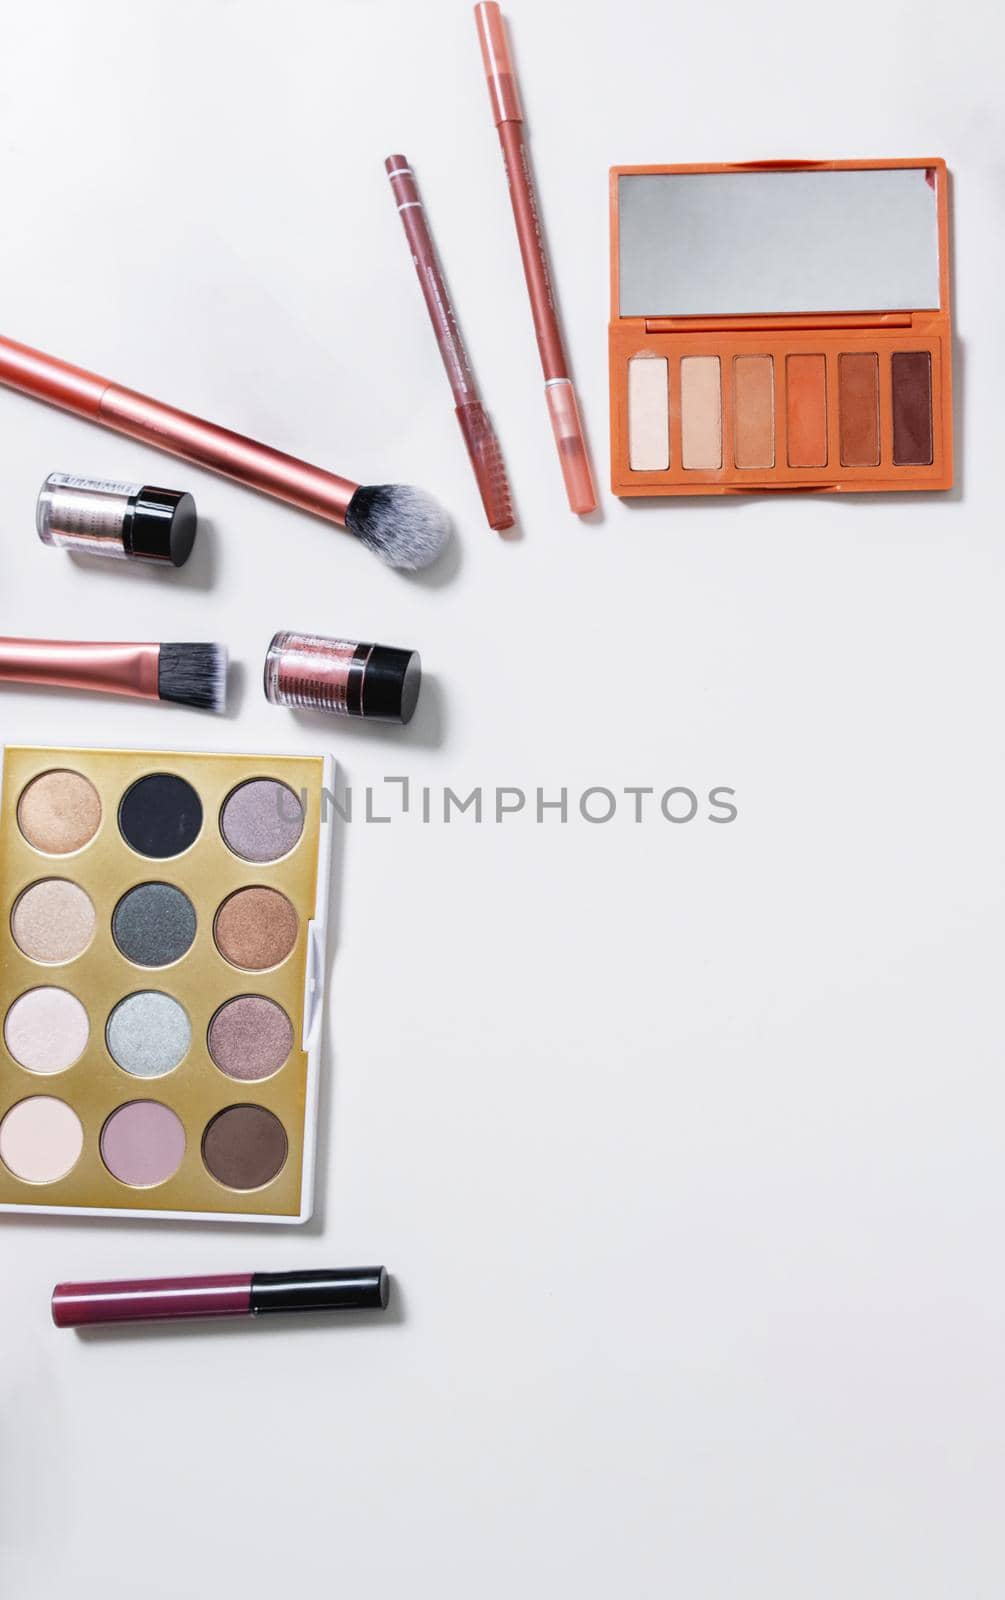 Decorative flat lay composition with cosmetics and flowers. Flat lay, top view on white background